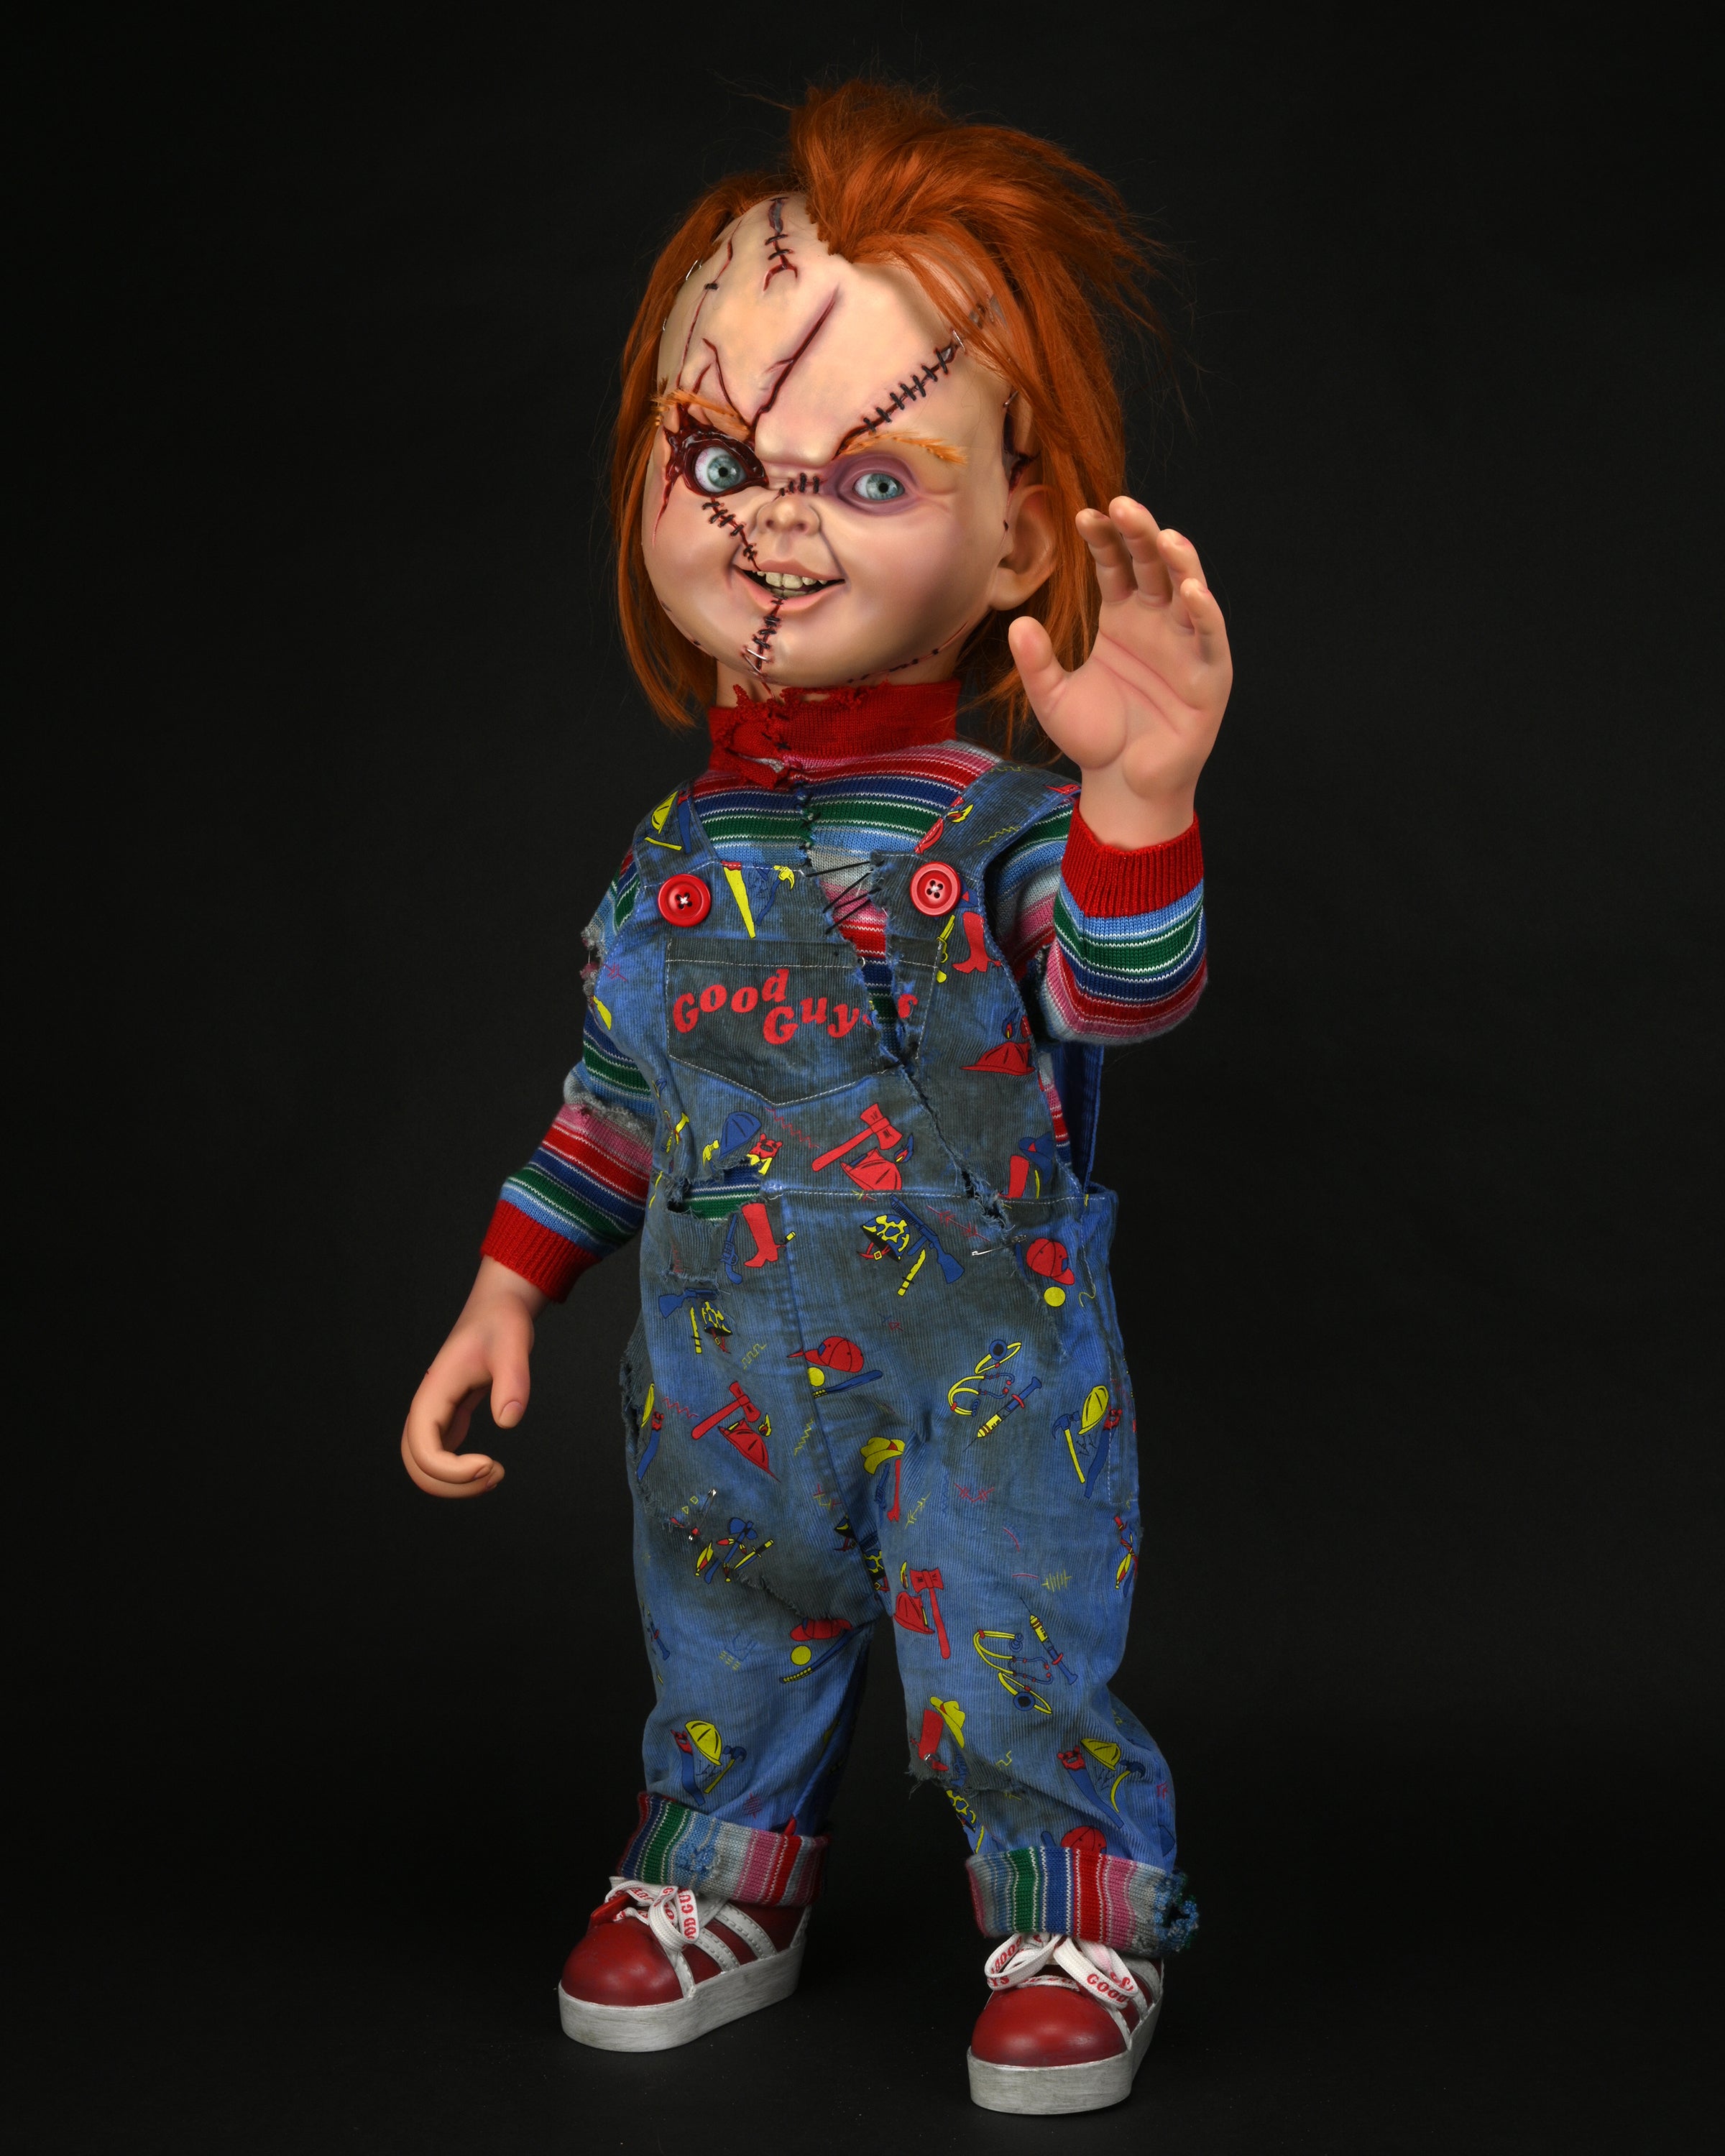 deon posley recommends pictures of chucky pic